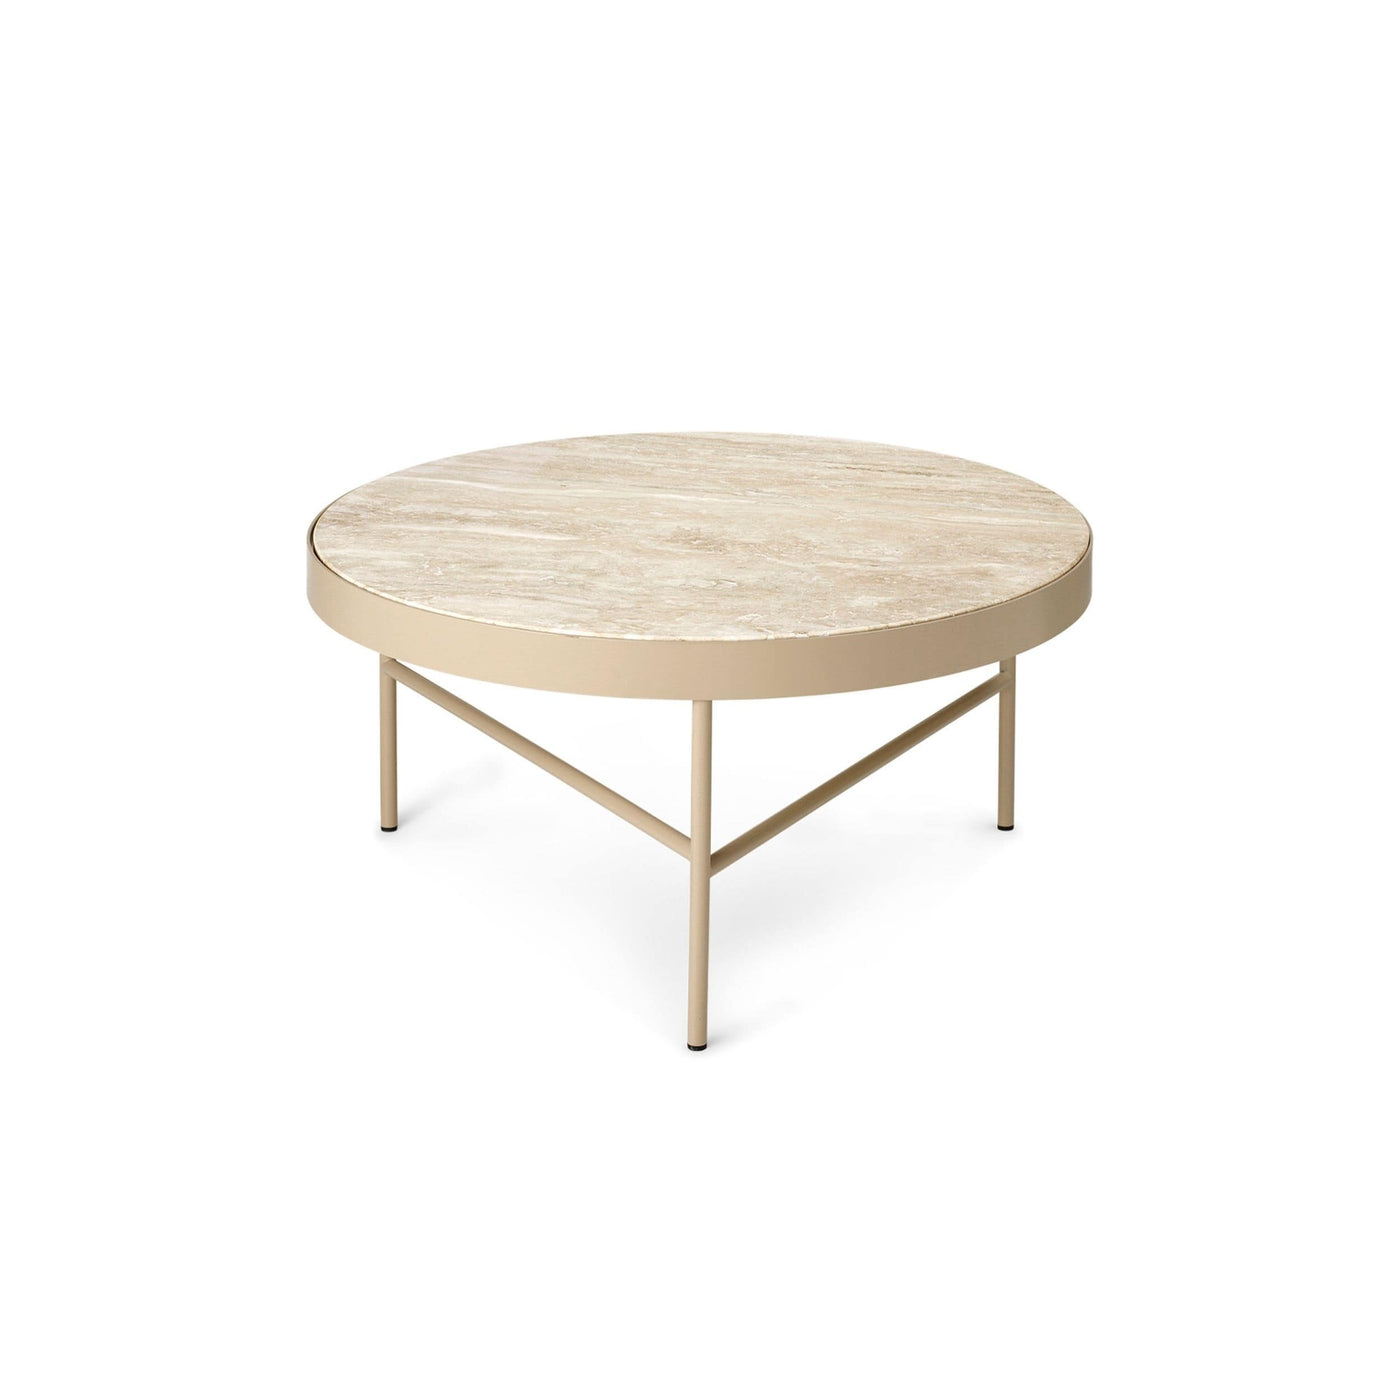 Ferm Living Travertine Coffee Table Large in cashmere. Shop online at someday designs